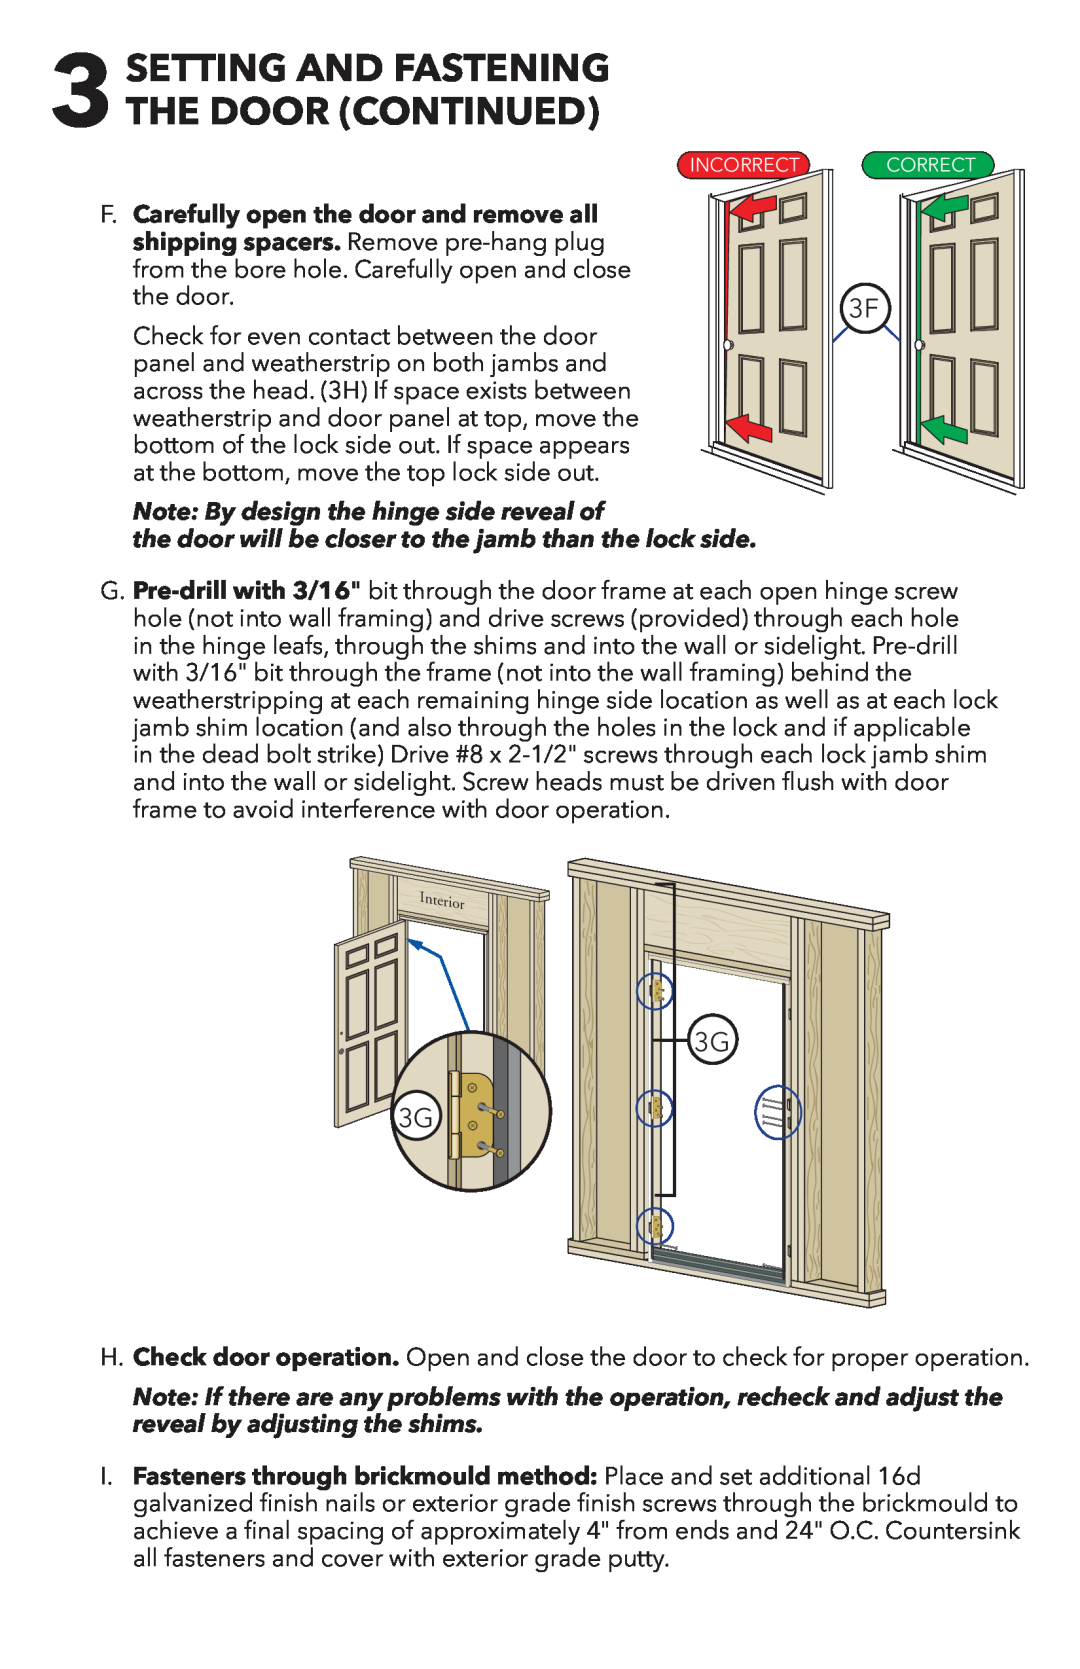 Pella 818T0101 installation instructions 3G 3G2G, Setting And Fastening The Door Continued 